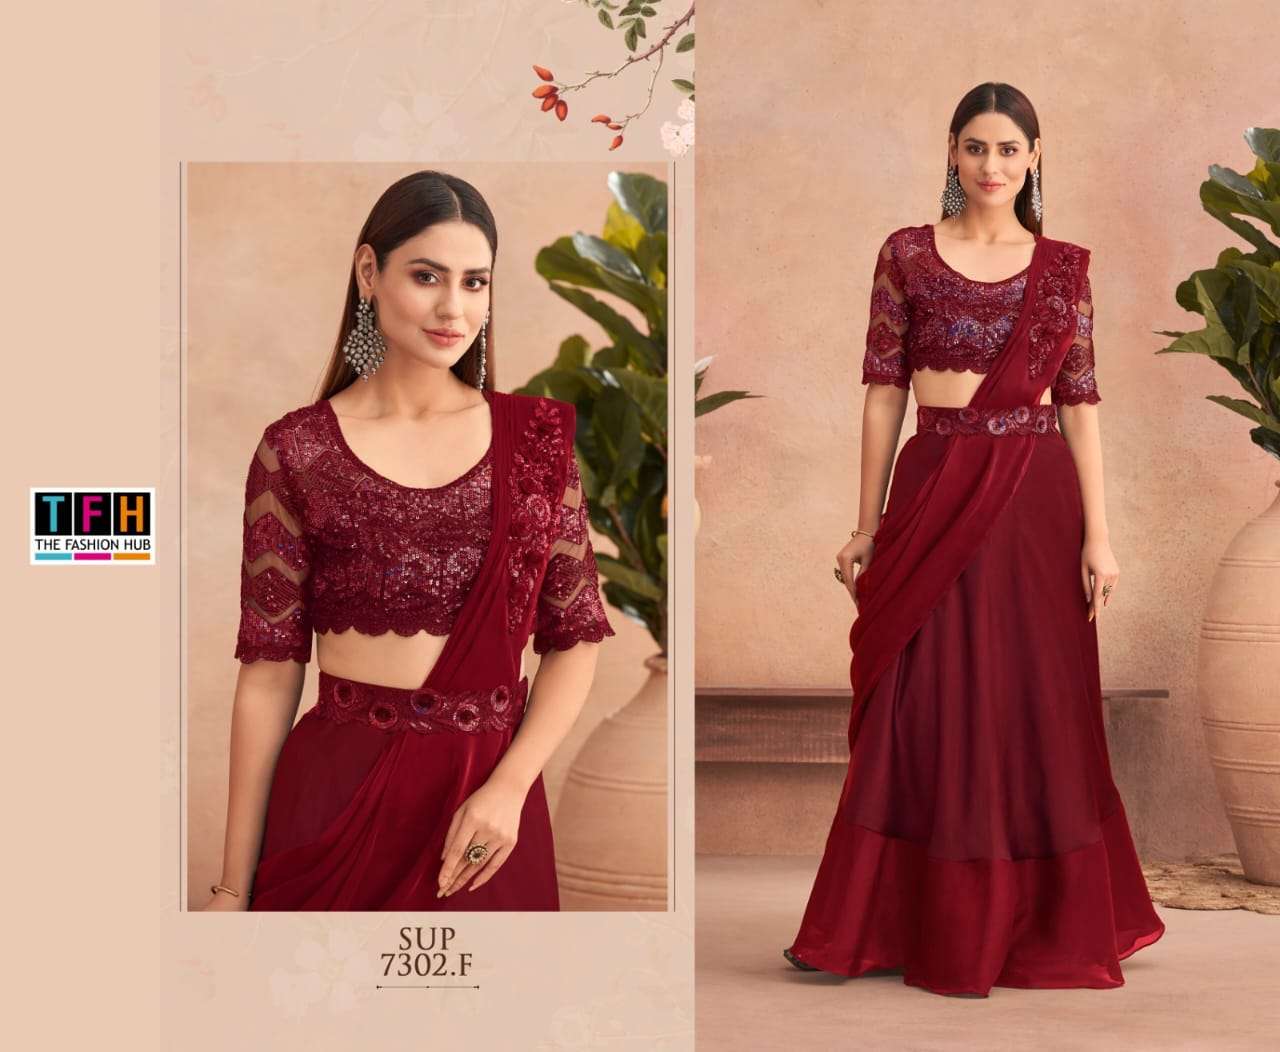 Super Star 7302 Colours By Tfh 7302-A To 7302-F Series Indian Traditional Wear Collection Beautiful Stylish Fancy Colorful Party Wear & Occasional Wear Fancy Sarees At Wholesale Price